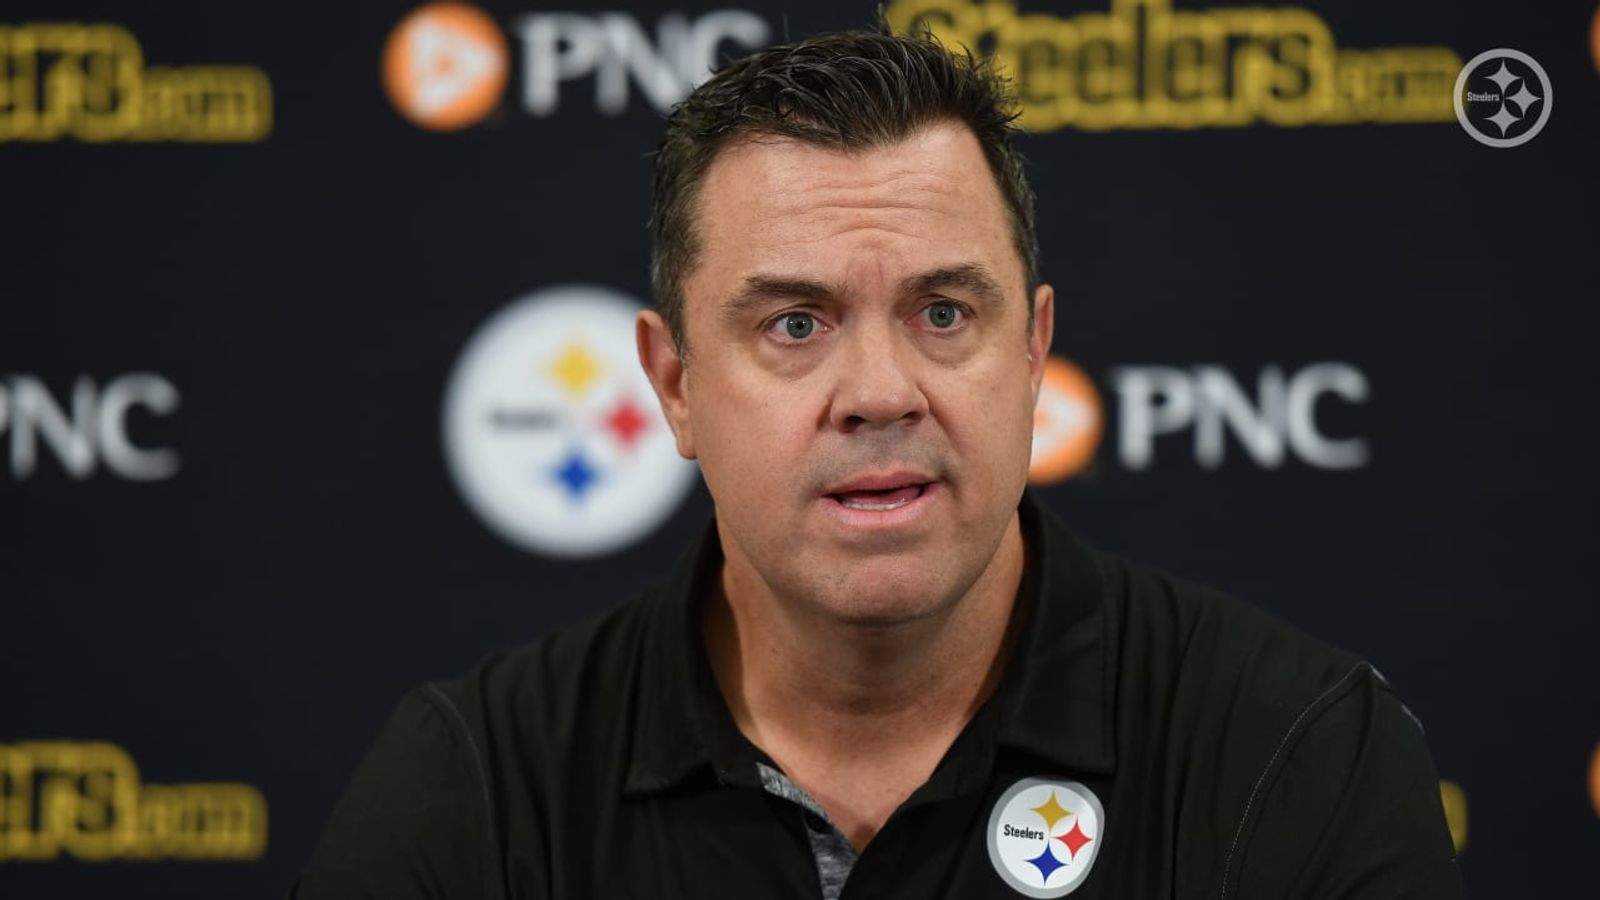 Steelers Fans Should Look At Asst. GM Andy Weidl's Draft History